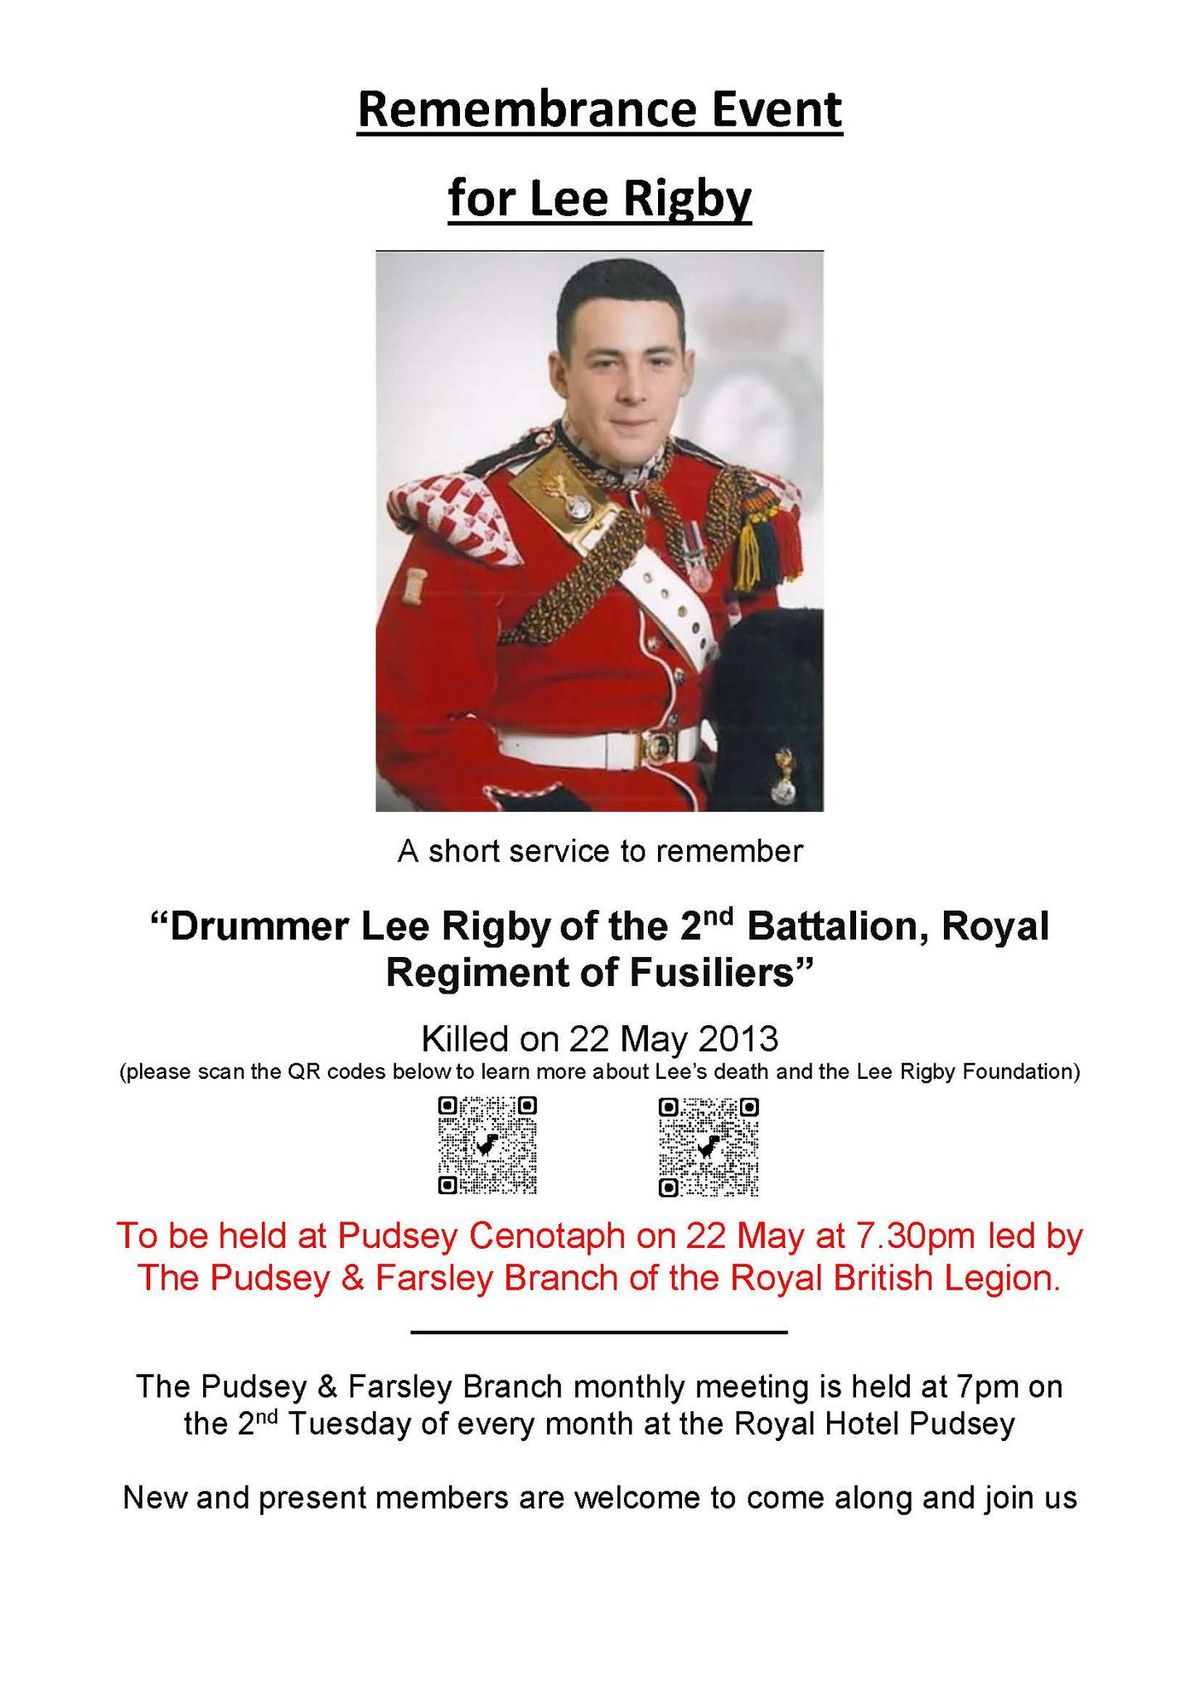 Remembrance Event for Lee Rigby